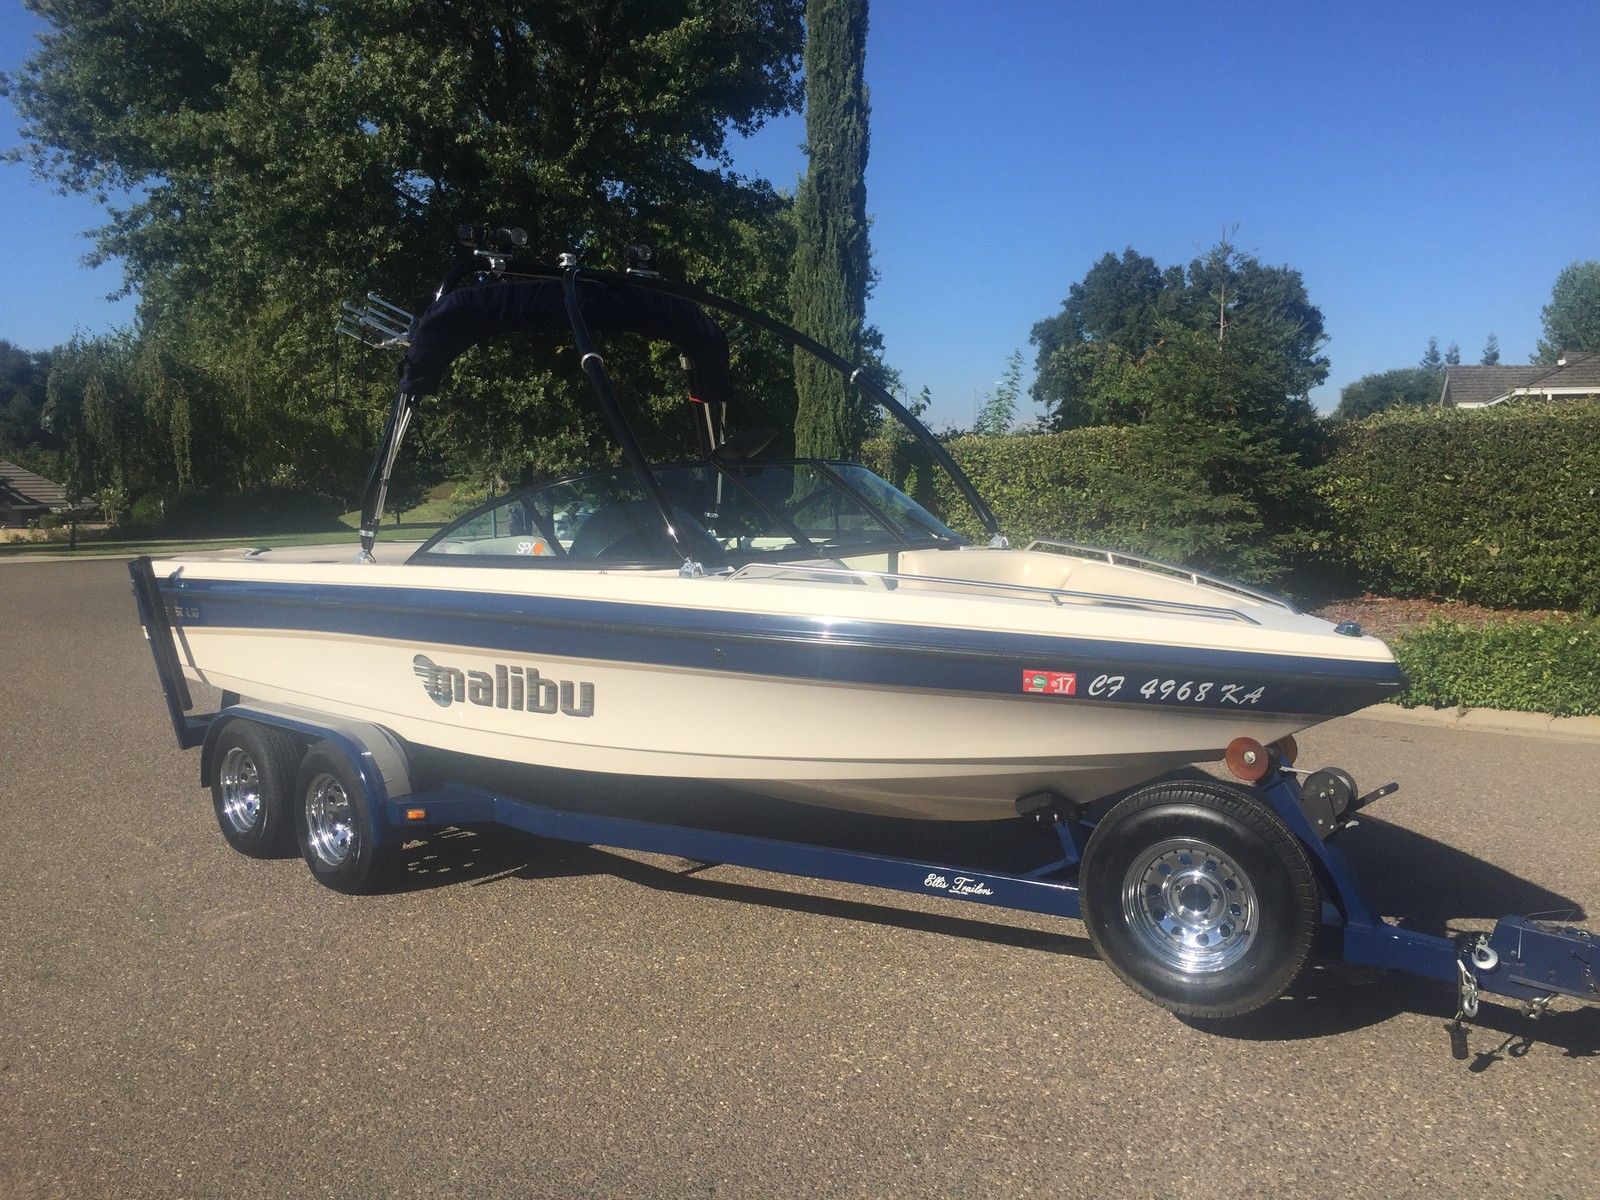 Malibu Sunsetter LXI 1999 for sale for $18,500 - Boats ...